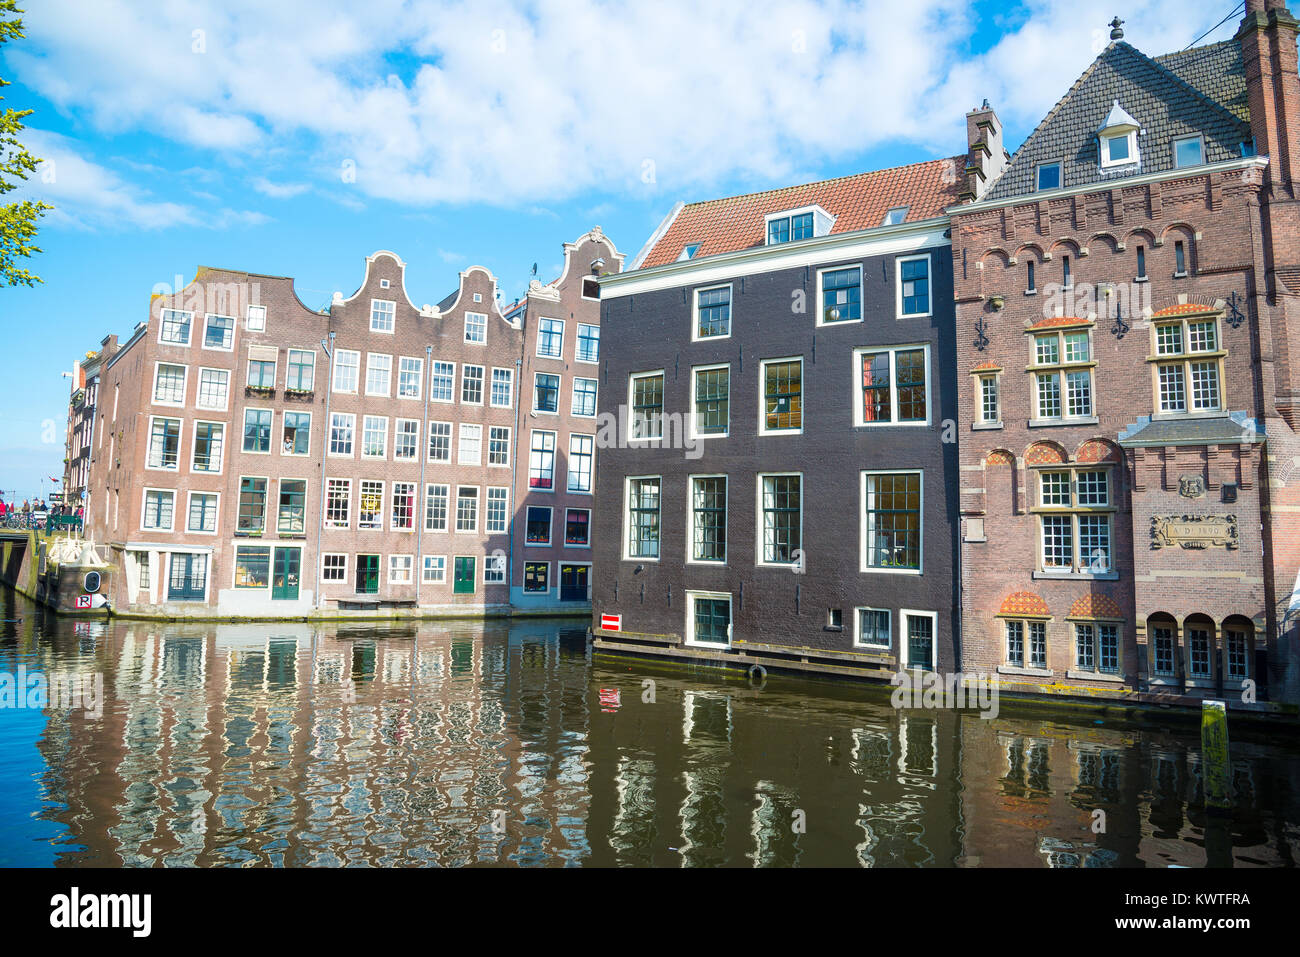 Amsterdam, Netherlands - April 19, 2017: Traditional dutch medieval buildings on the water, Amsterdam. Stock Photo